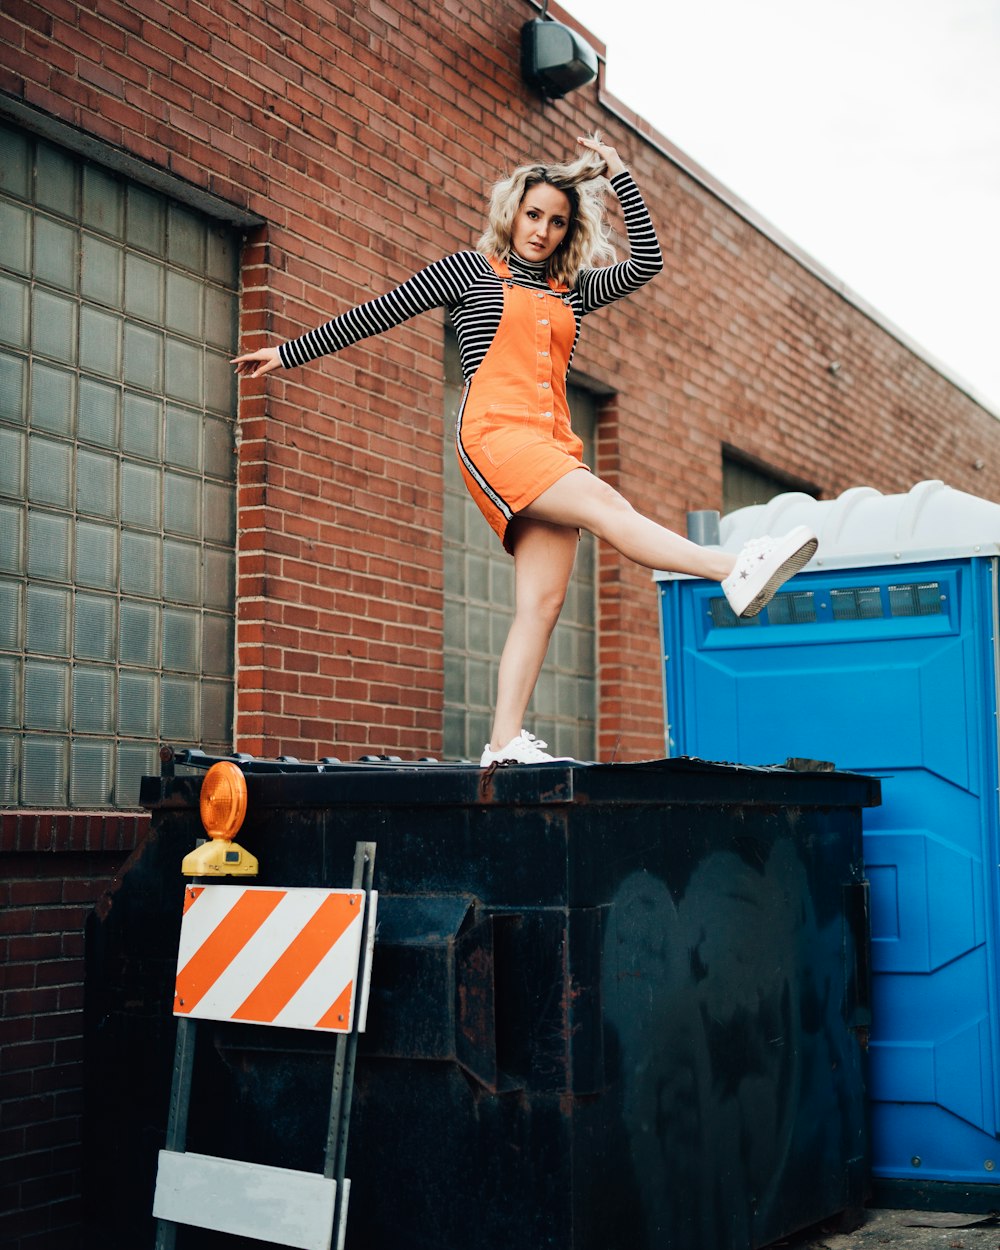 woman in orange dress standing on blue plastic container